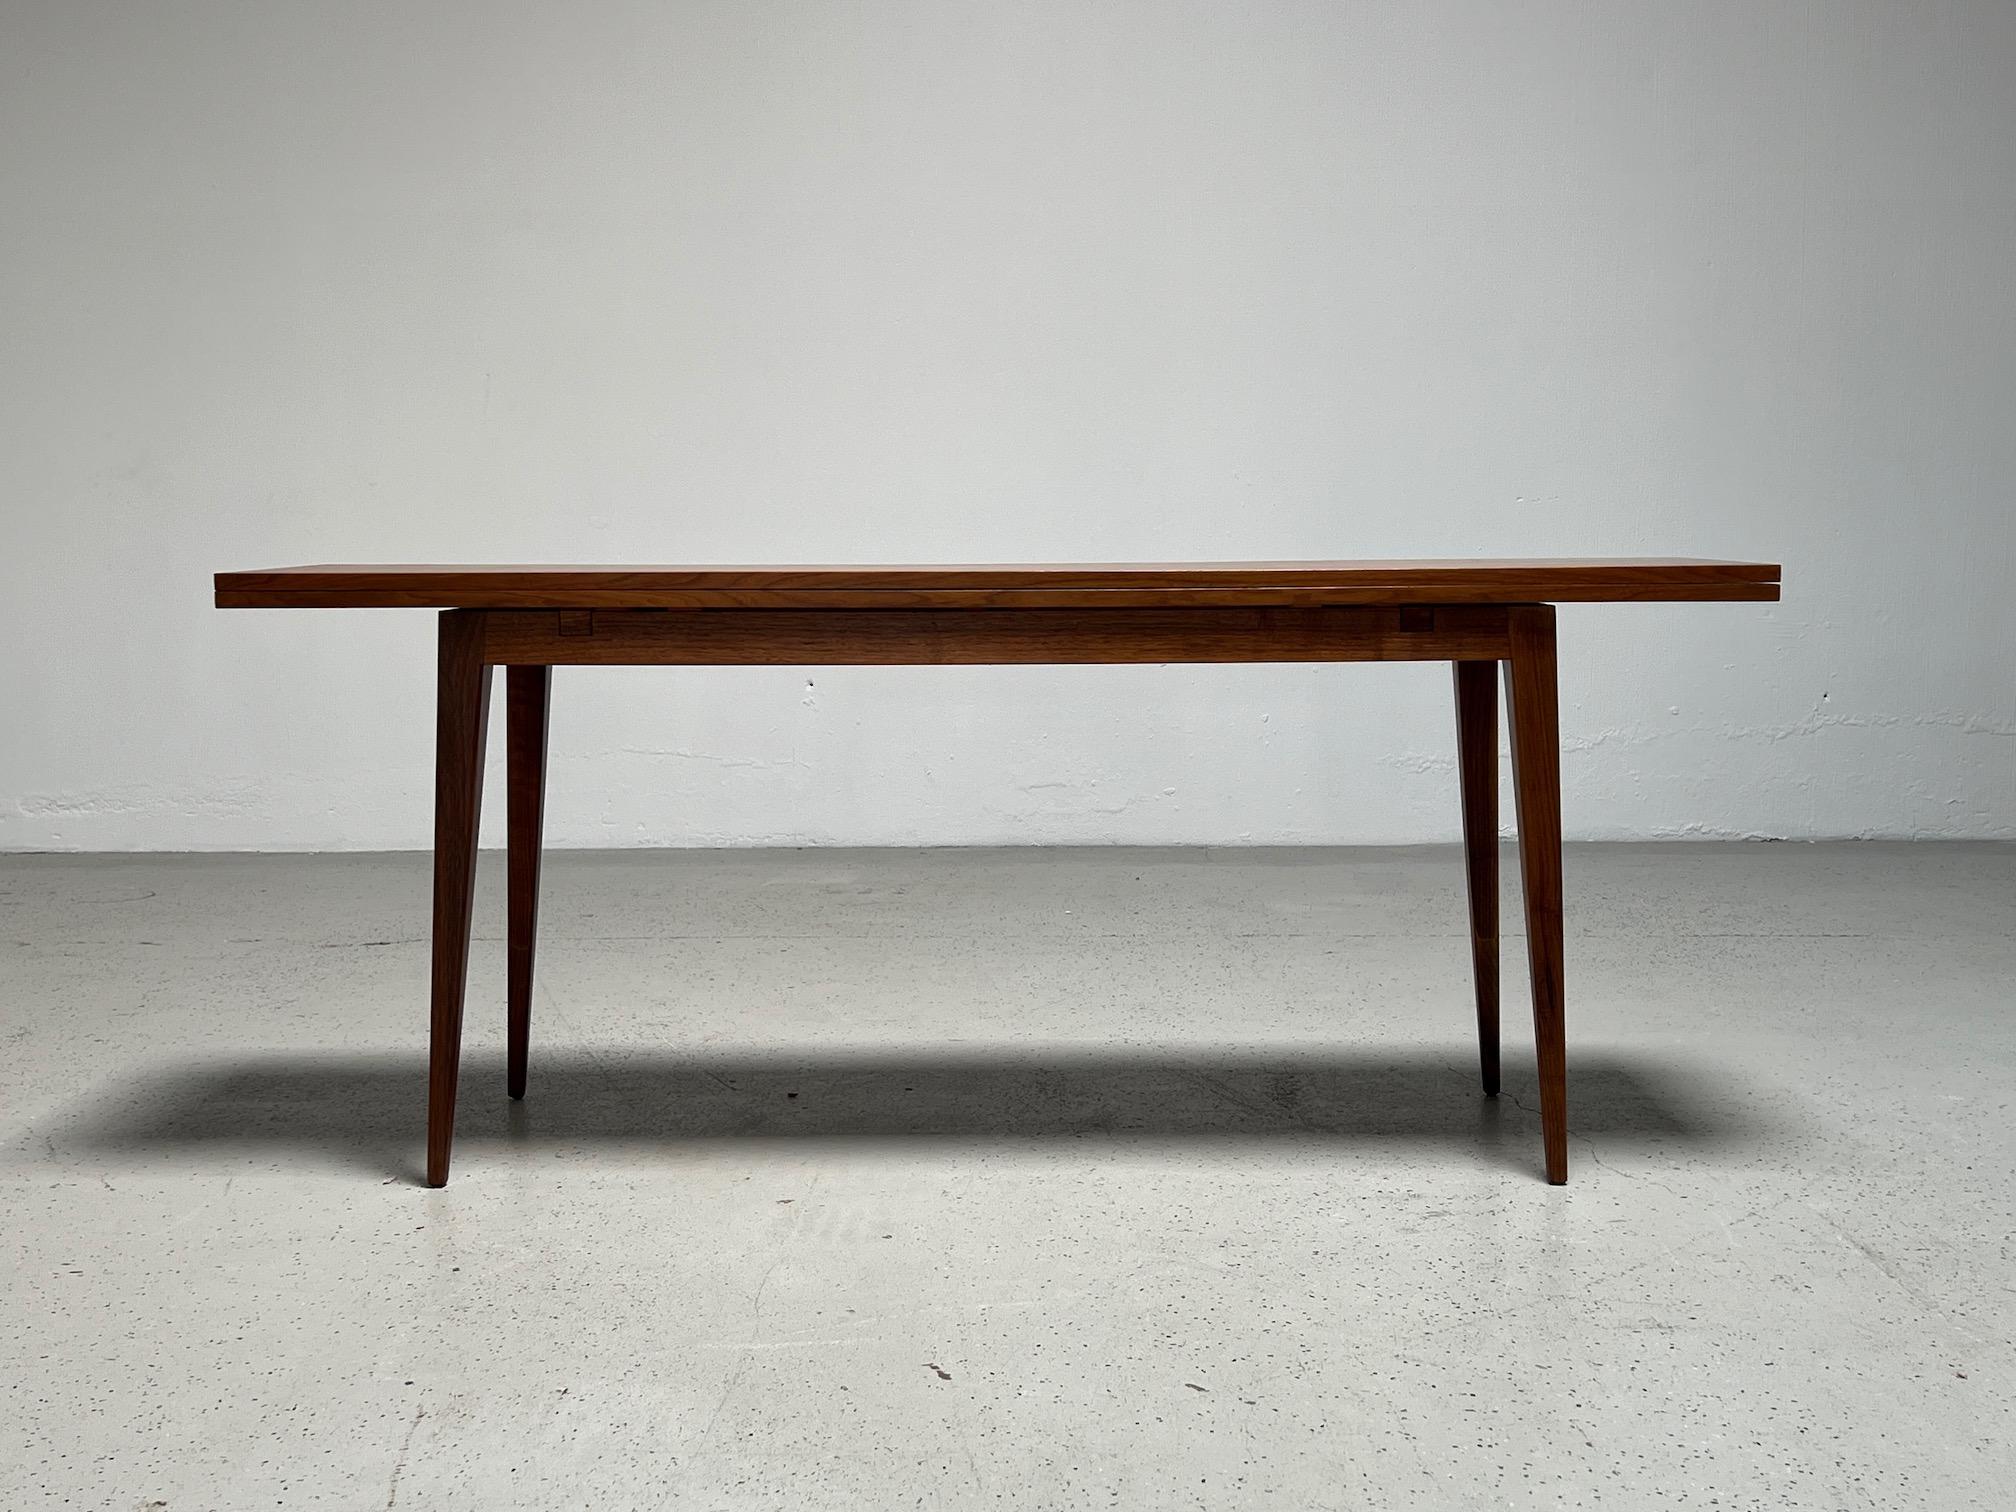 A walnut flip top console table designed by Edward Wormley for Dunbar. Measures 72 x 34 x 29 H when open.